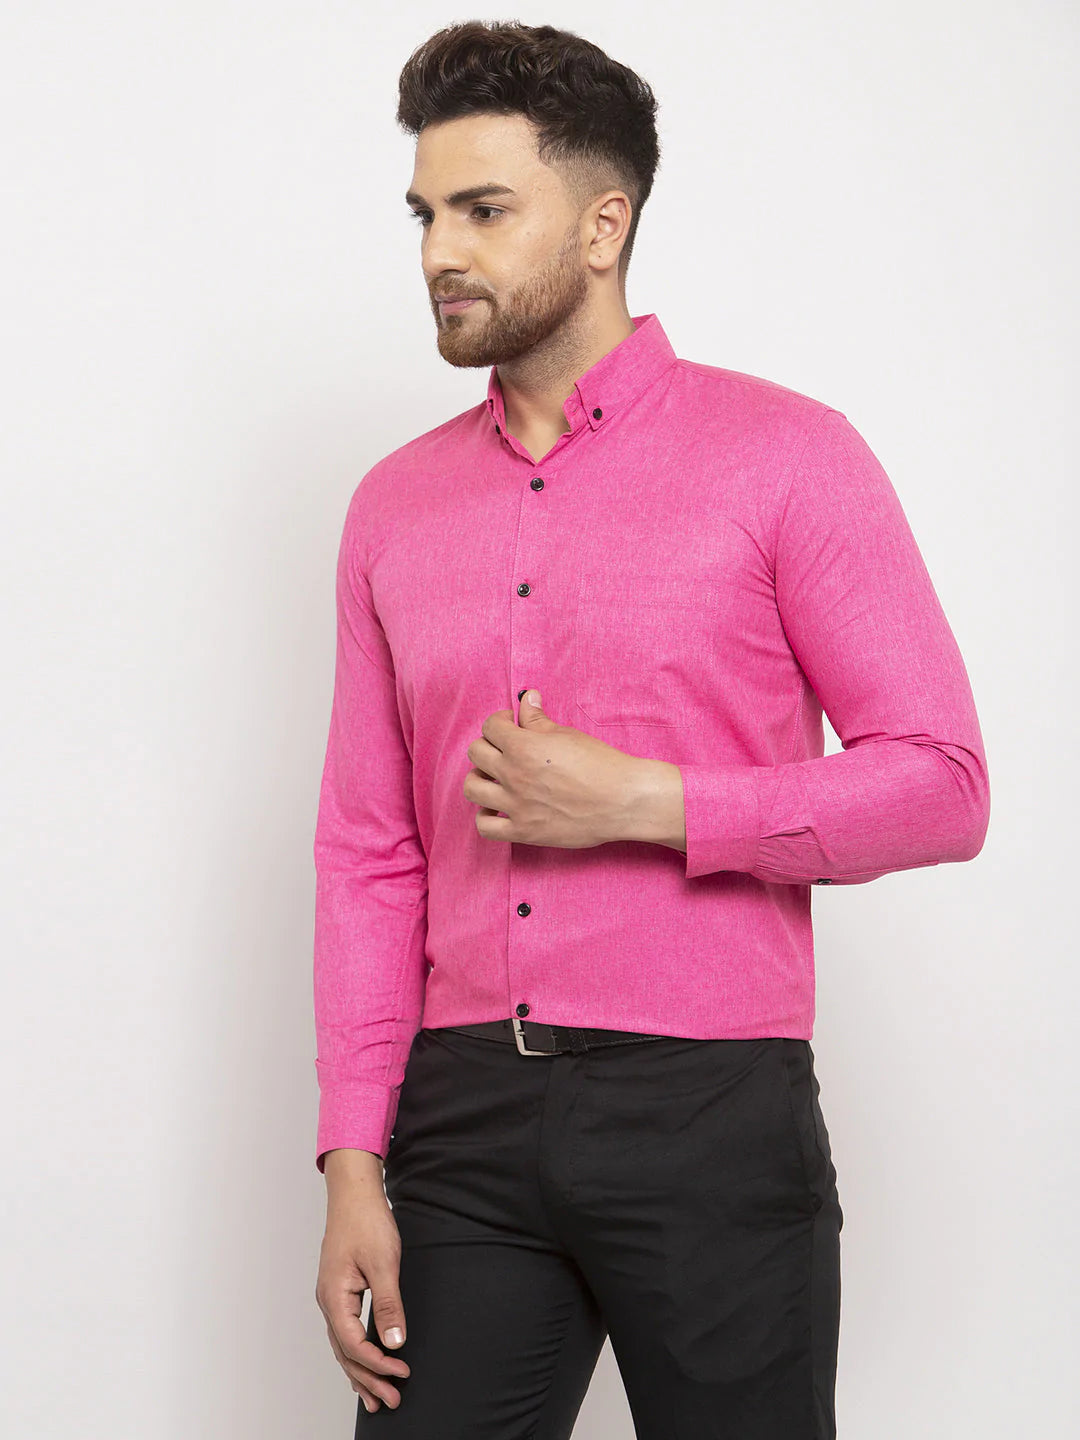 Jainish Pink Men's Cotton Solid Button Down Formal Shirts ( SF 734Pink )